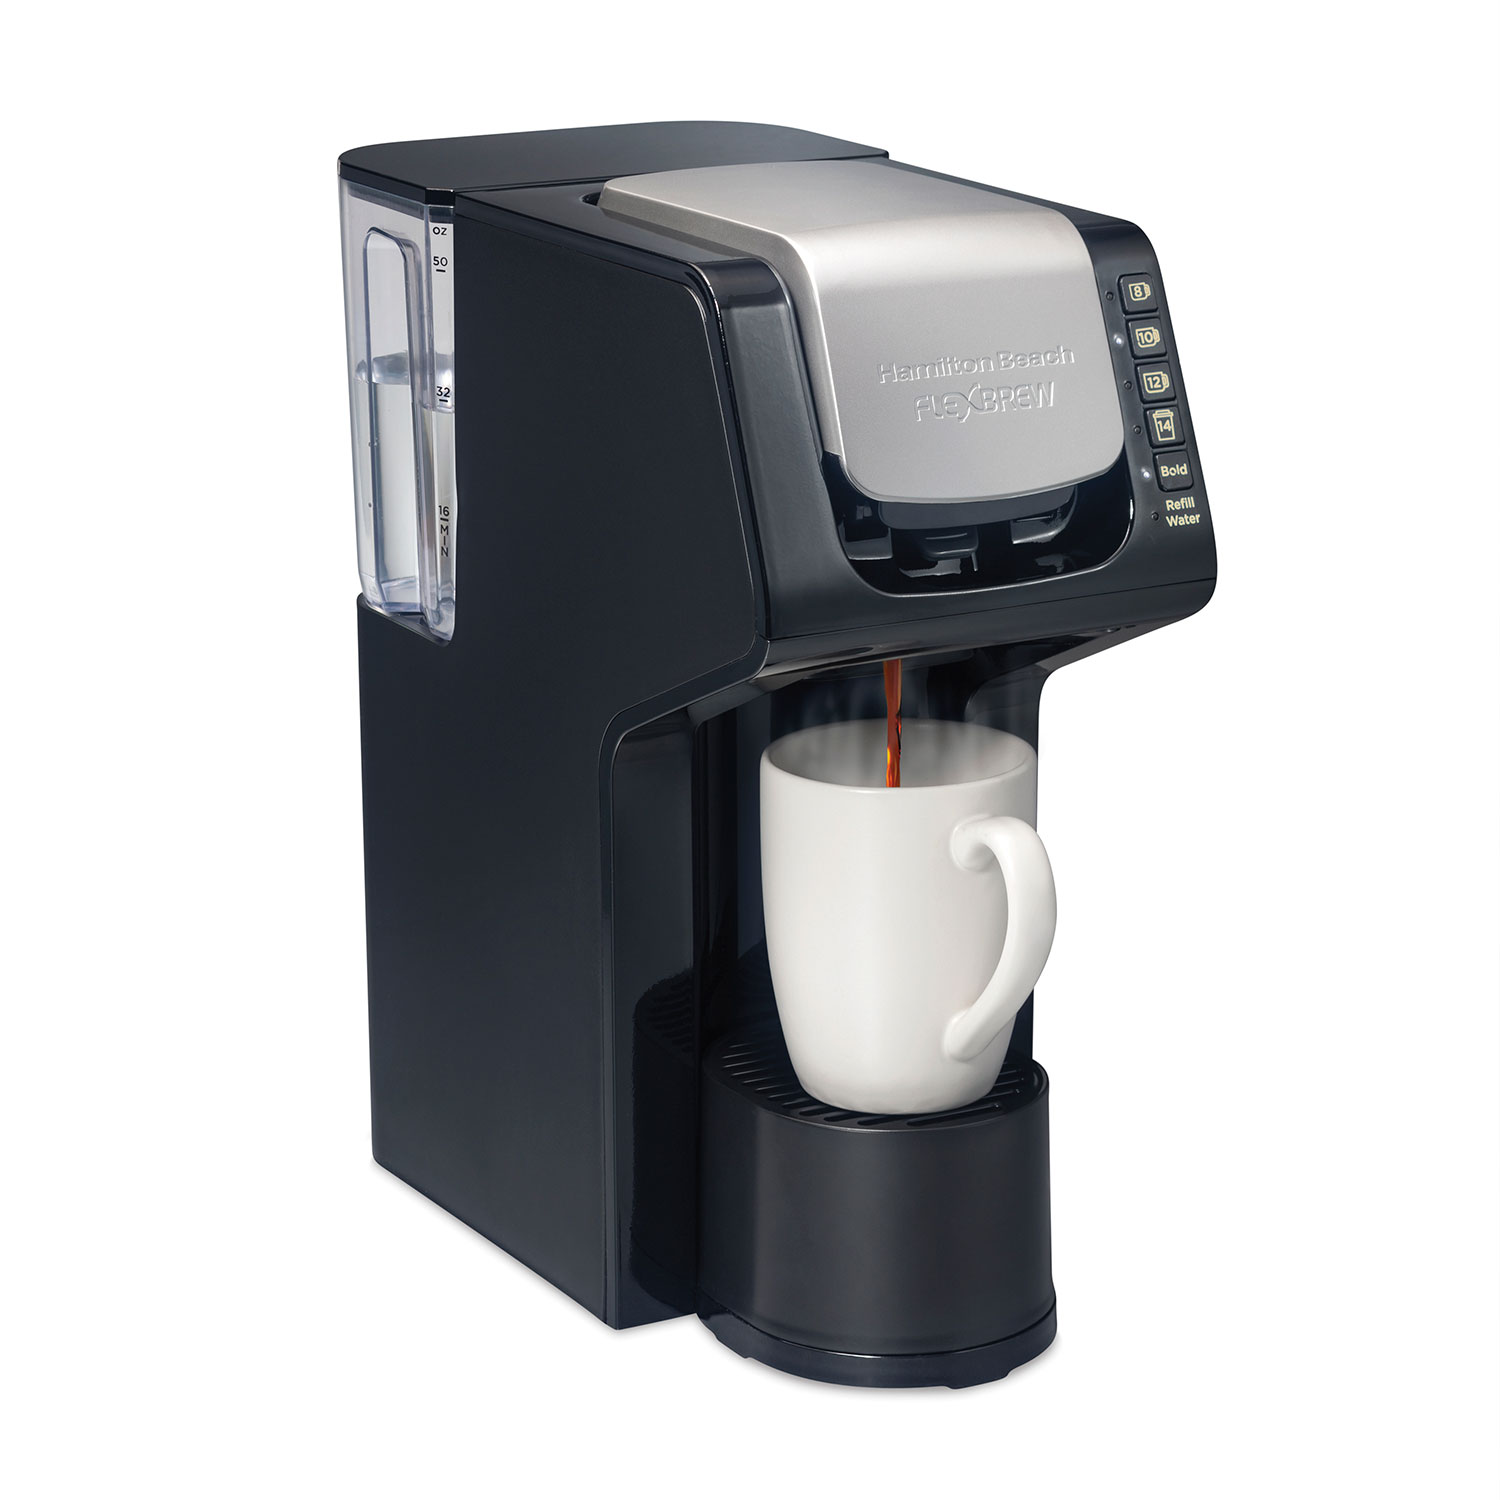 FlexBrew® Single-Serve Coffee Maker with Removable Reservoir (49901G)